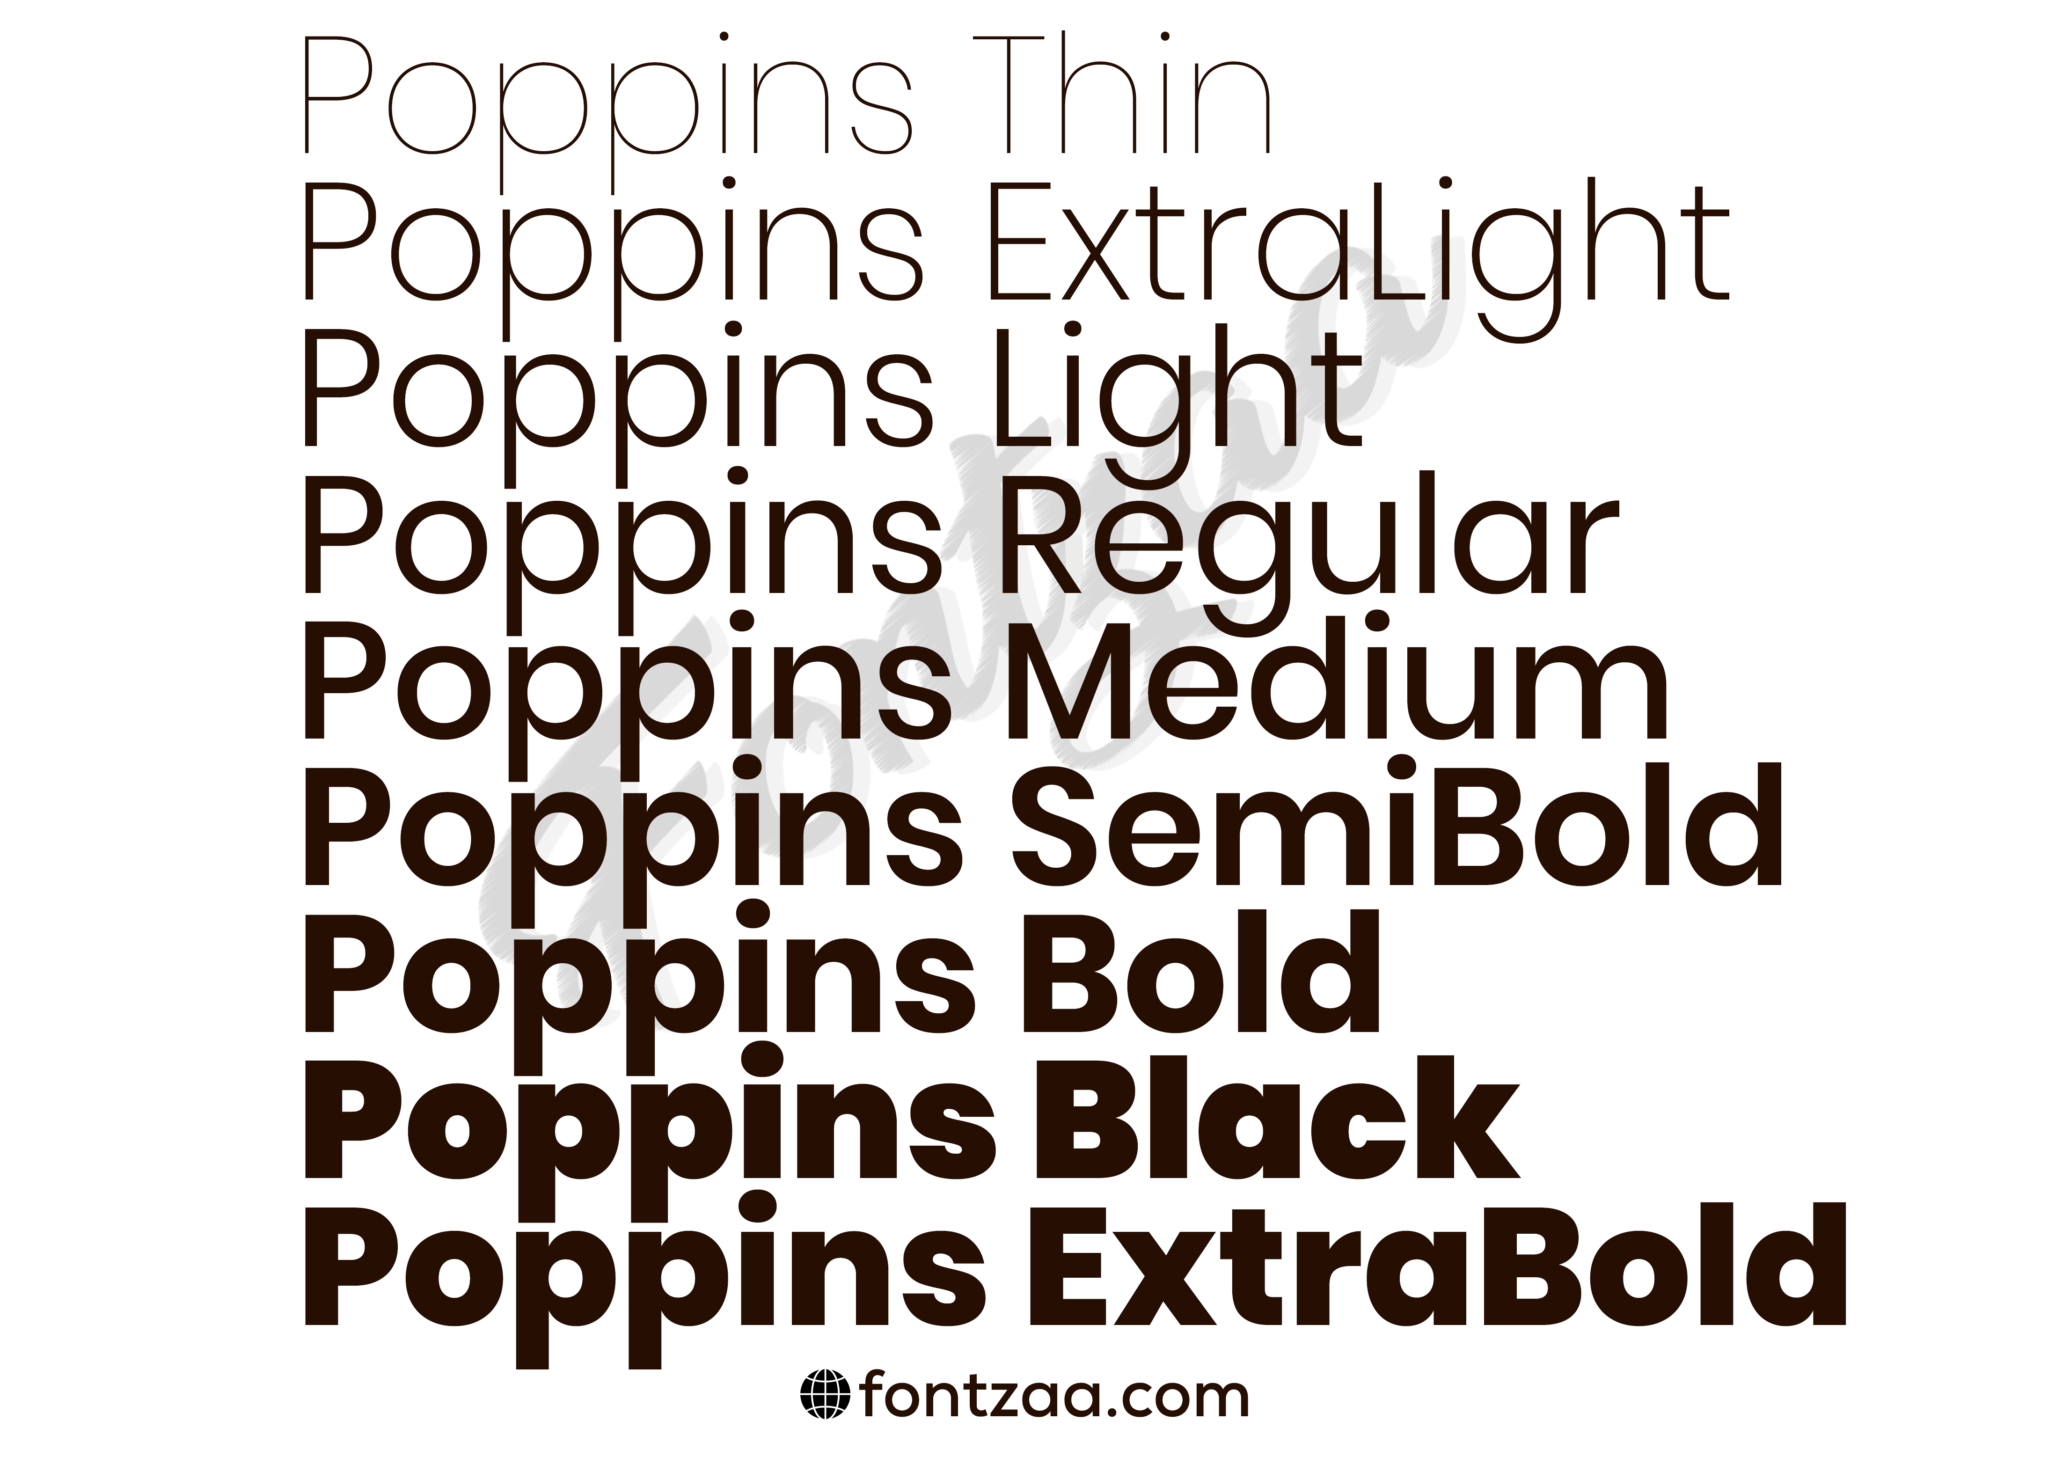 poppins font download photoshop